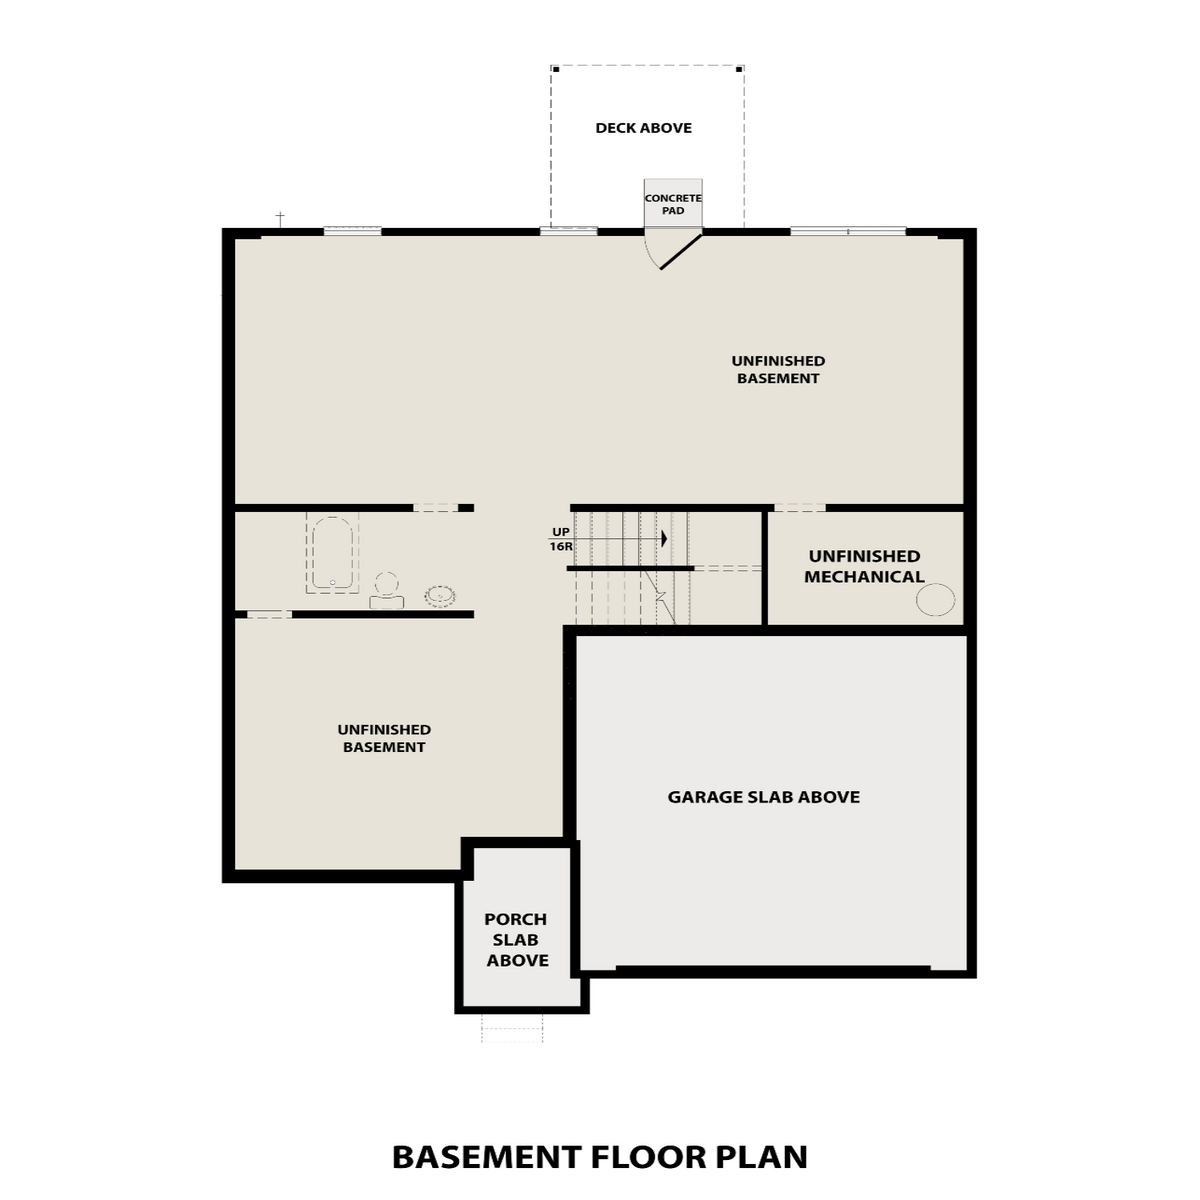 3 - The Hickory B- Unfinished Basement  floor plan layout for 45 Rolling Rock Way in Davidson Homes' Riverwood community.